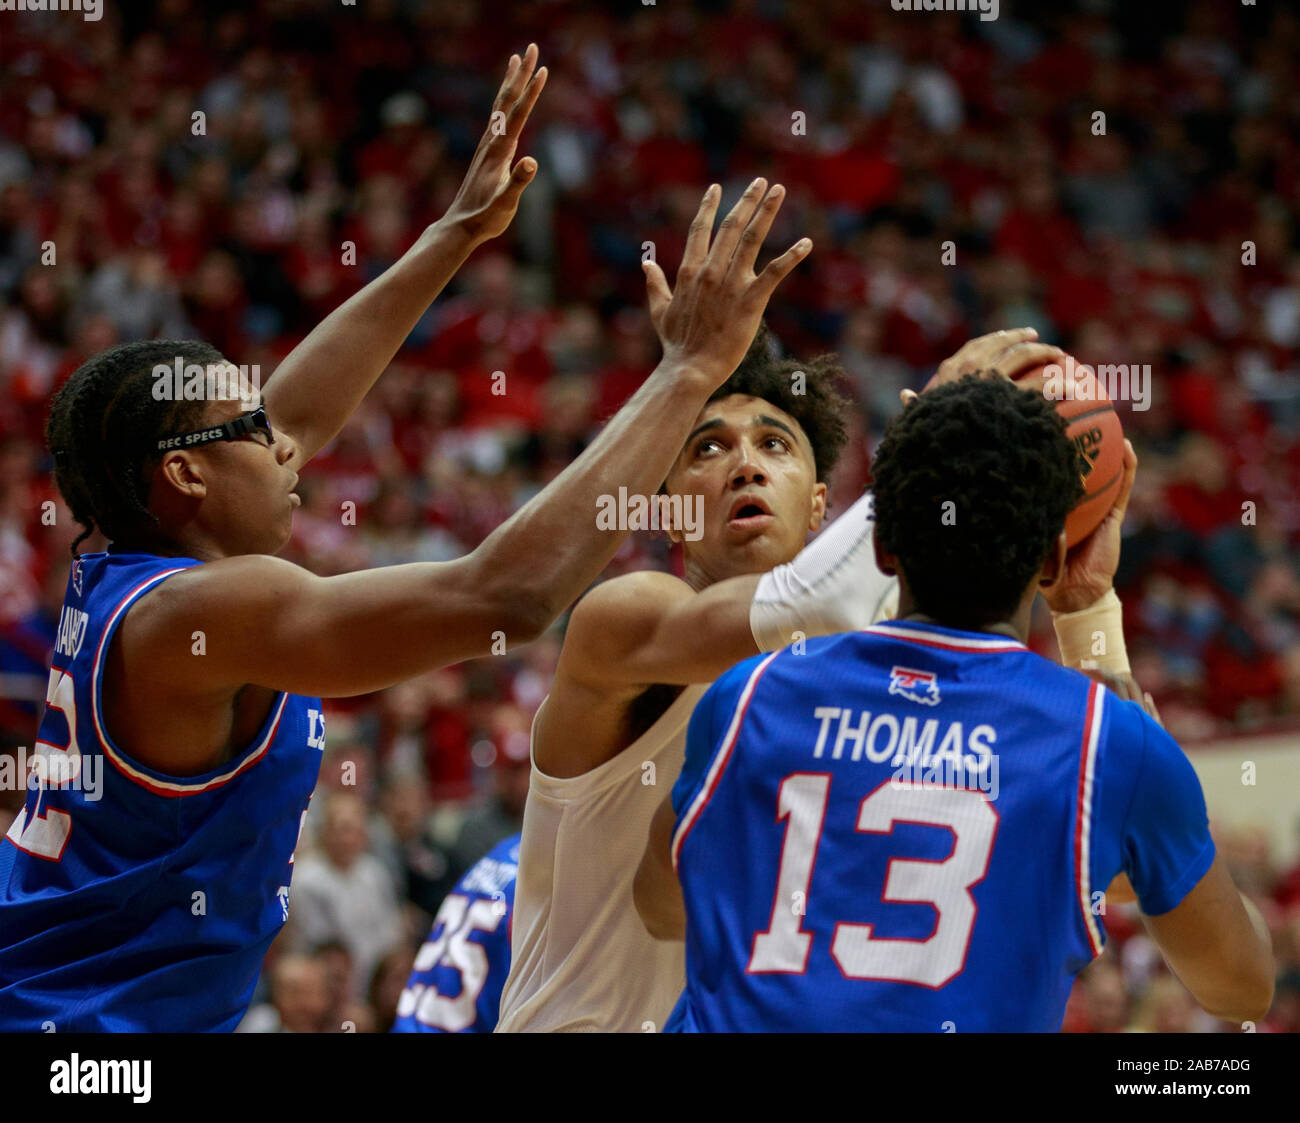 Indiana University's Trayce Jackson-Davis plays against Louisiana Tech during an NCAA college basketball game at IU's Assembly Hall in Bloomington.The Hoosiers beat the Bulldogs 88 to 75. Stock Photo